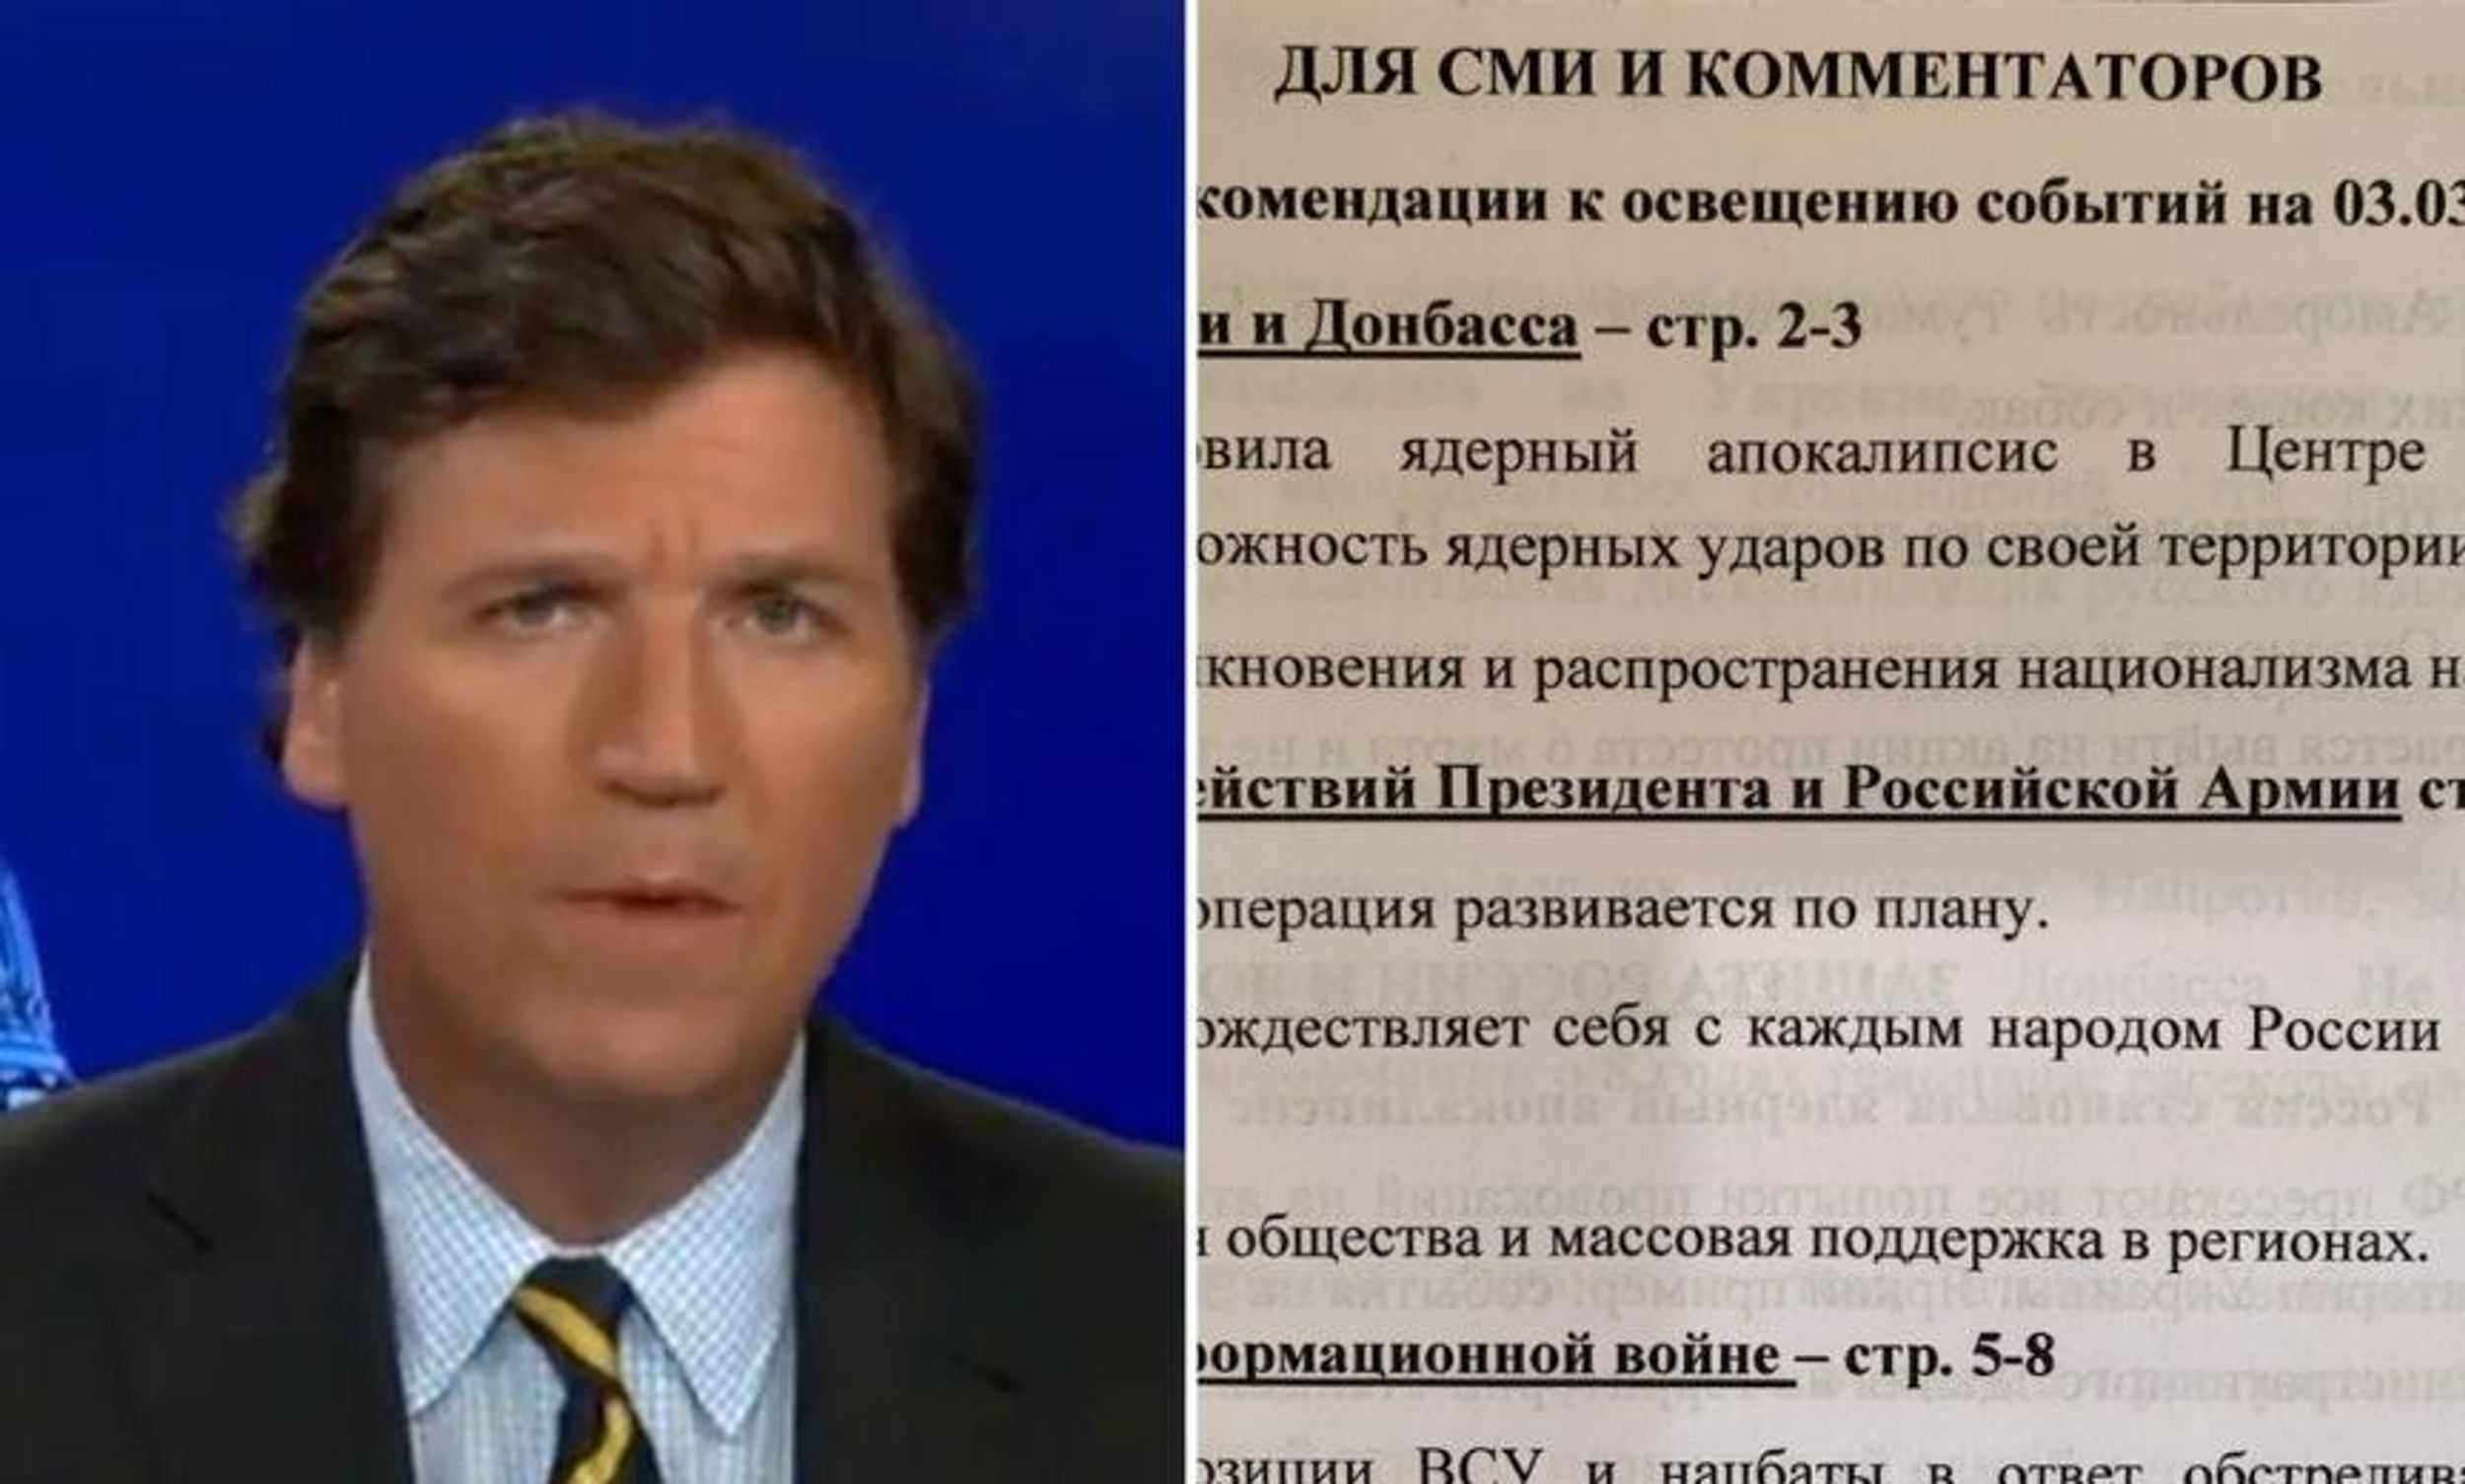 Leaked Kremlin Memo Urged Russian Media to Air Tucker's 'Essential' Pro-Putin Rants 'as Much as Possible'